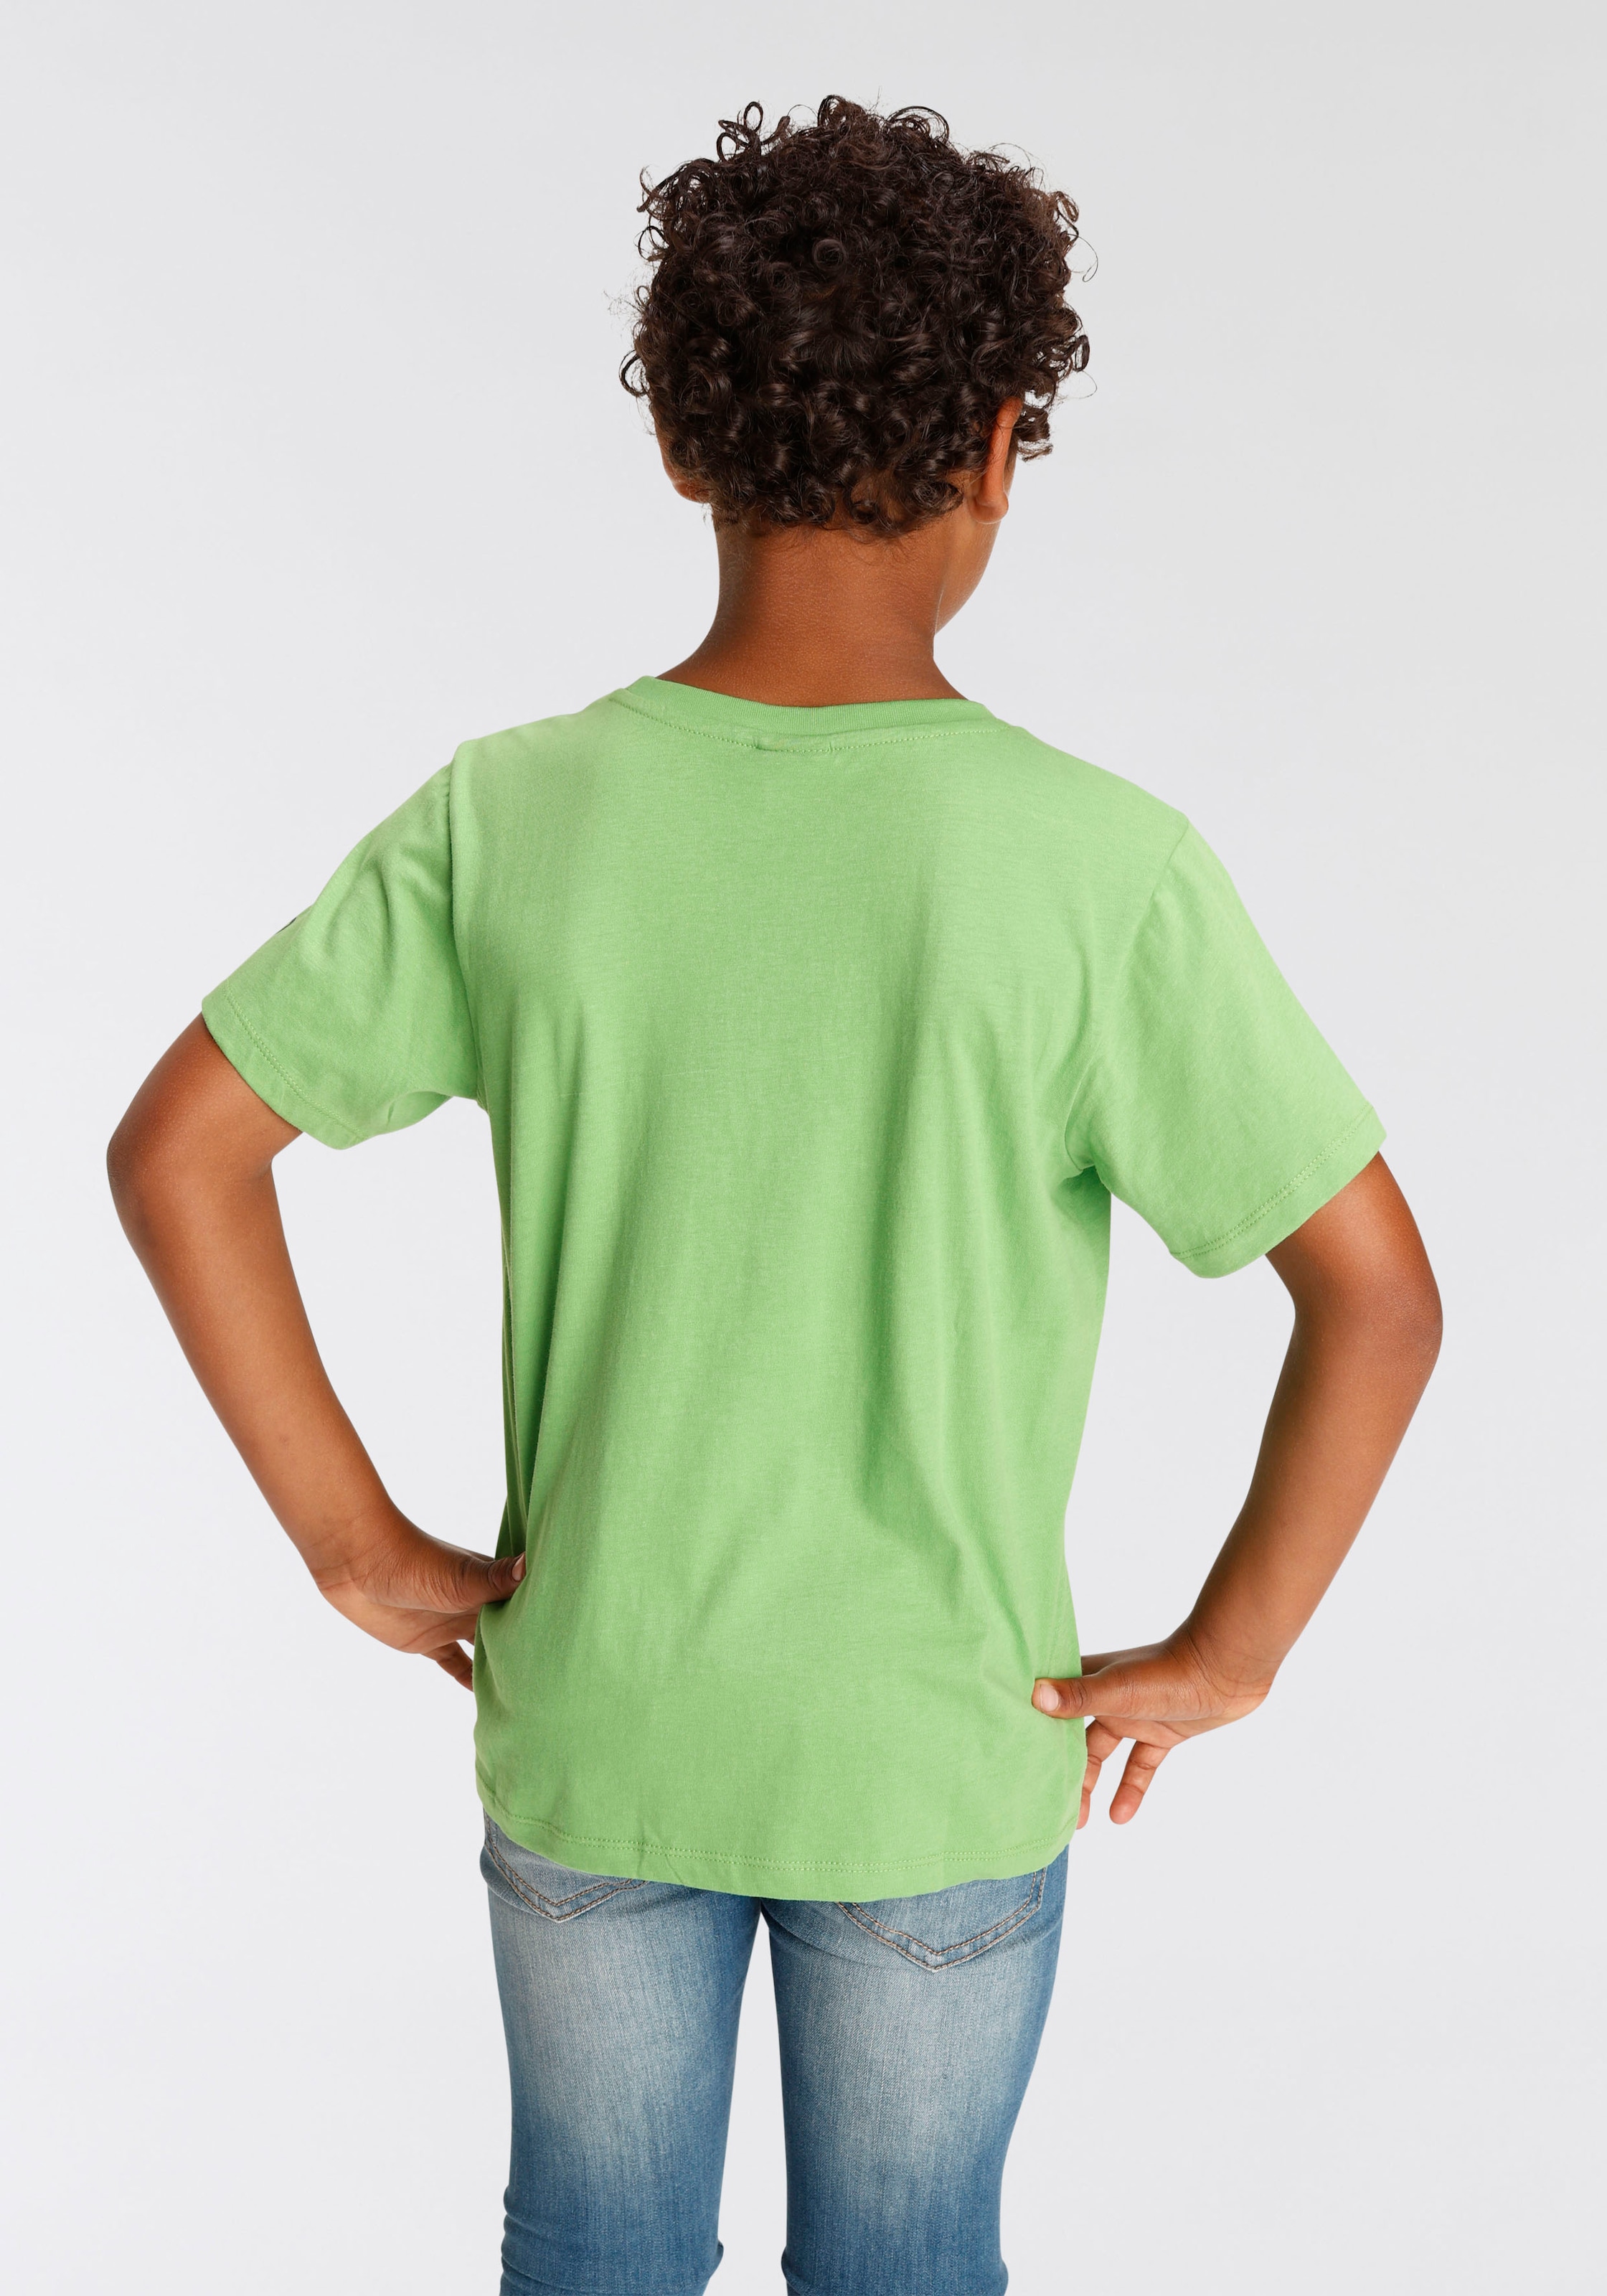 »TOMORROW IS T-Shirt bei KIDSWORLD TOO LATE«, Spruch